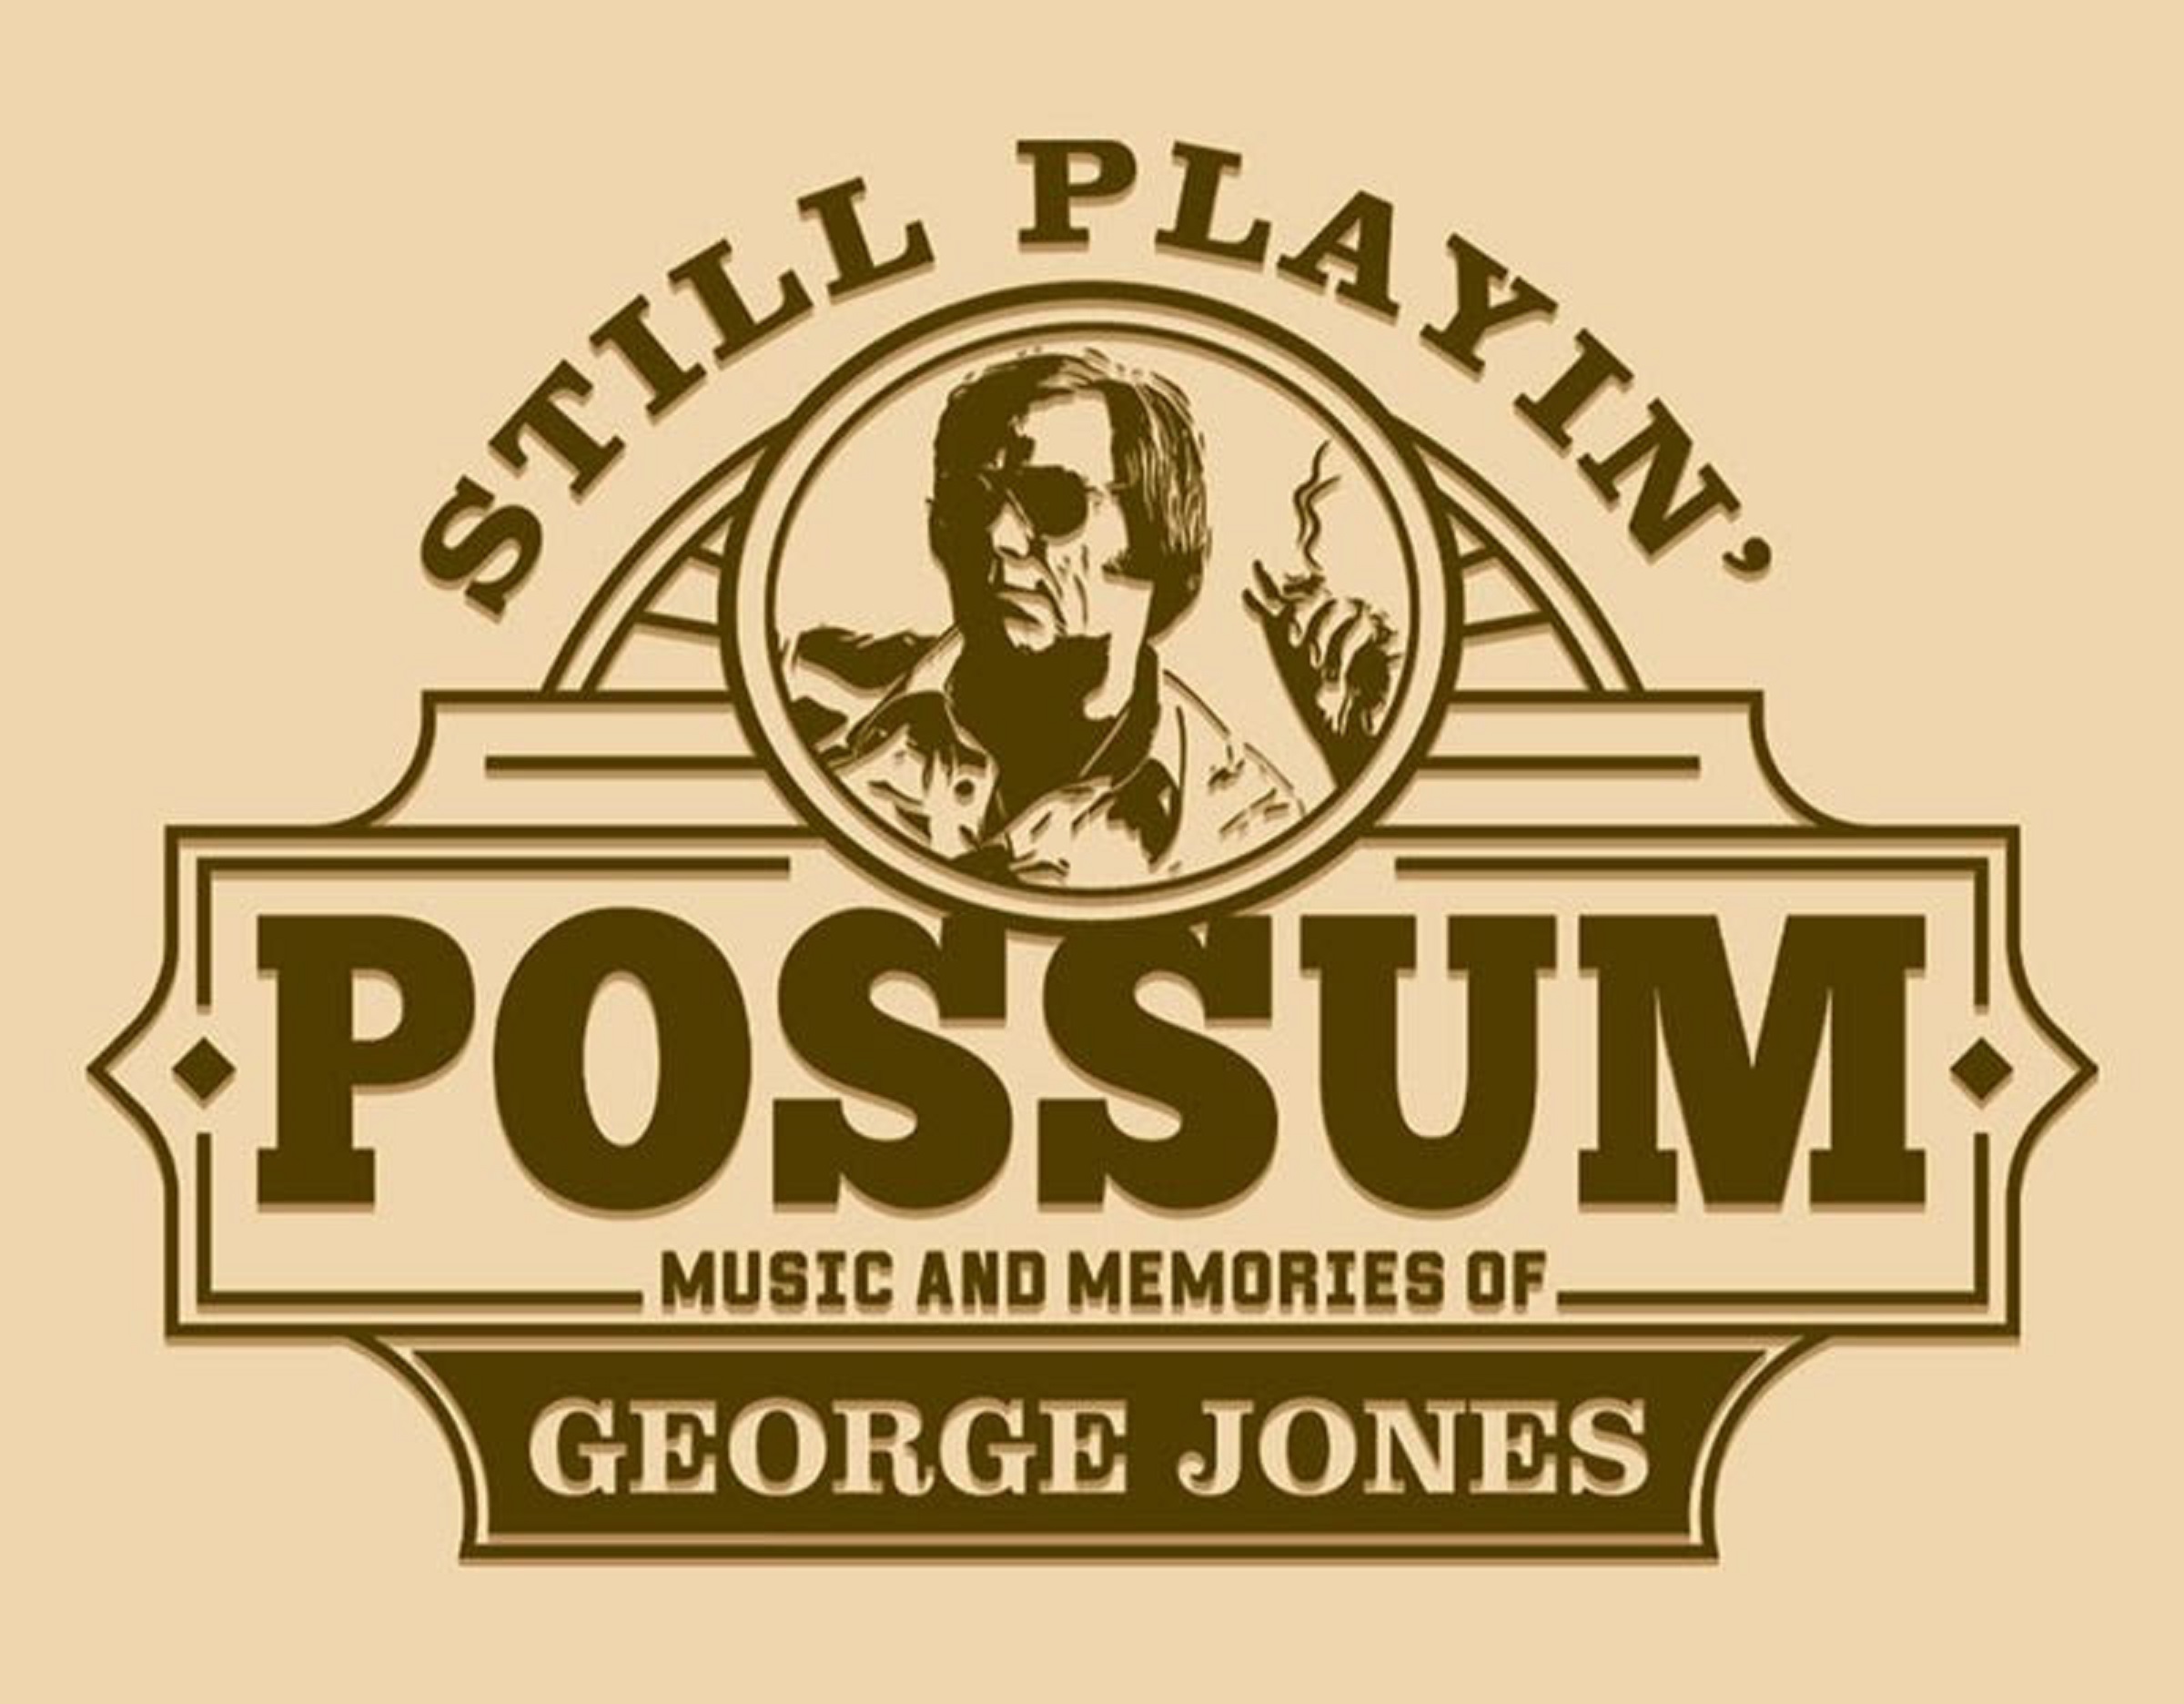 'STILL PLAYIN' POSSUM: A TRIBUTE TO GEORGE JONES' WINS TOP HONOR AT 45TH ANNUAL TELLY AWARDS